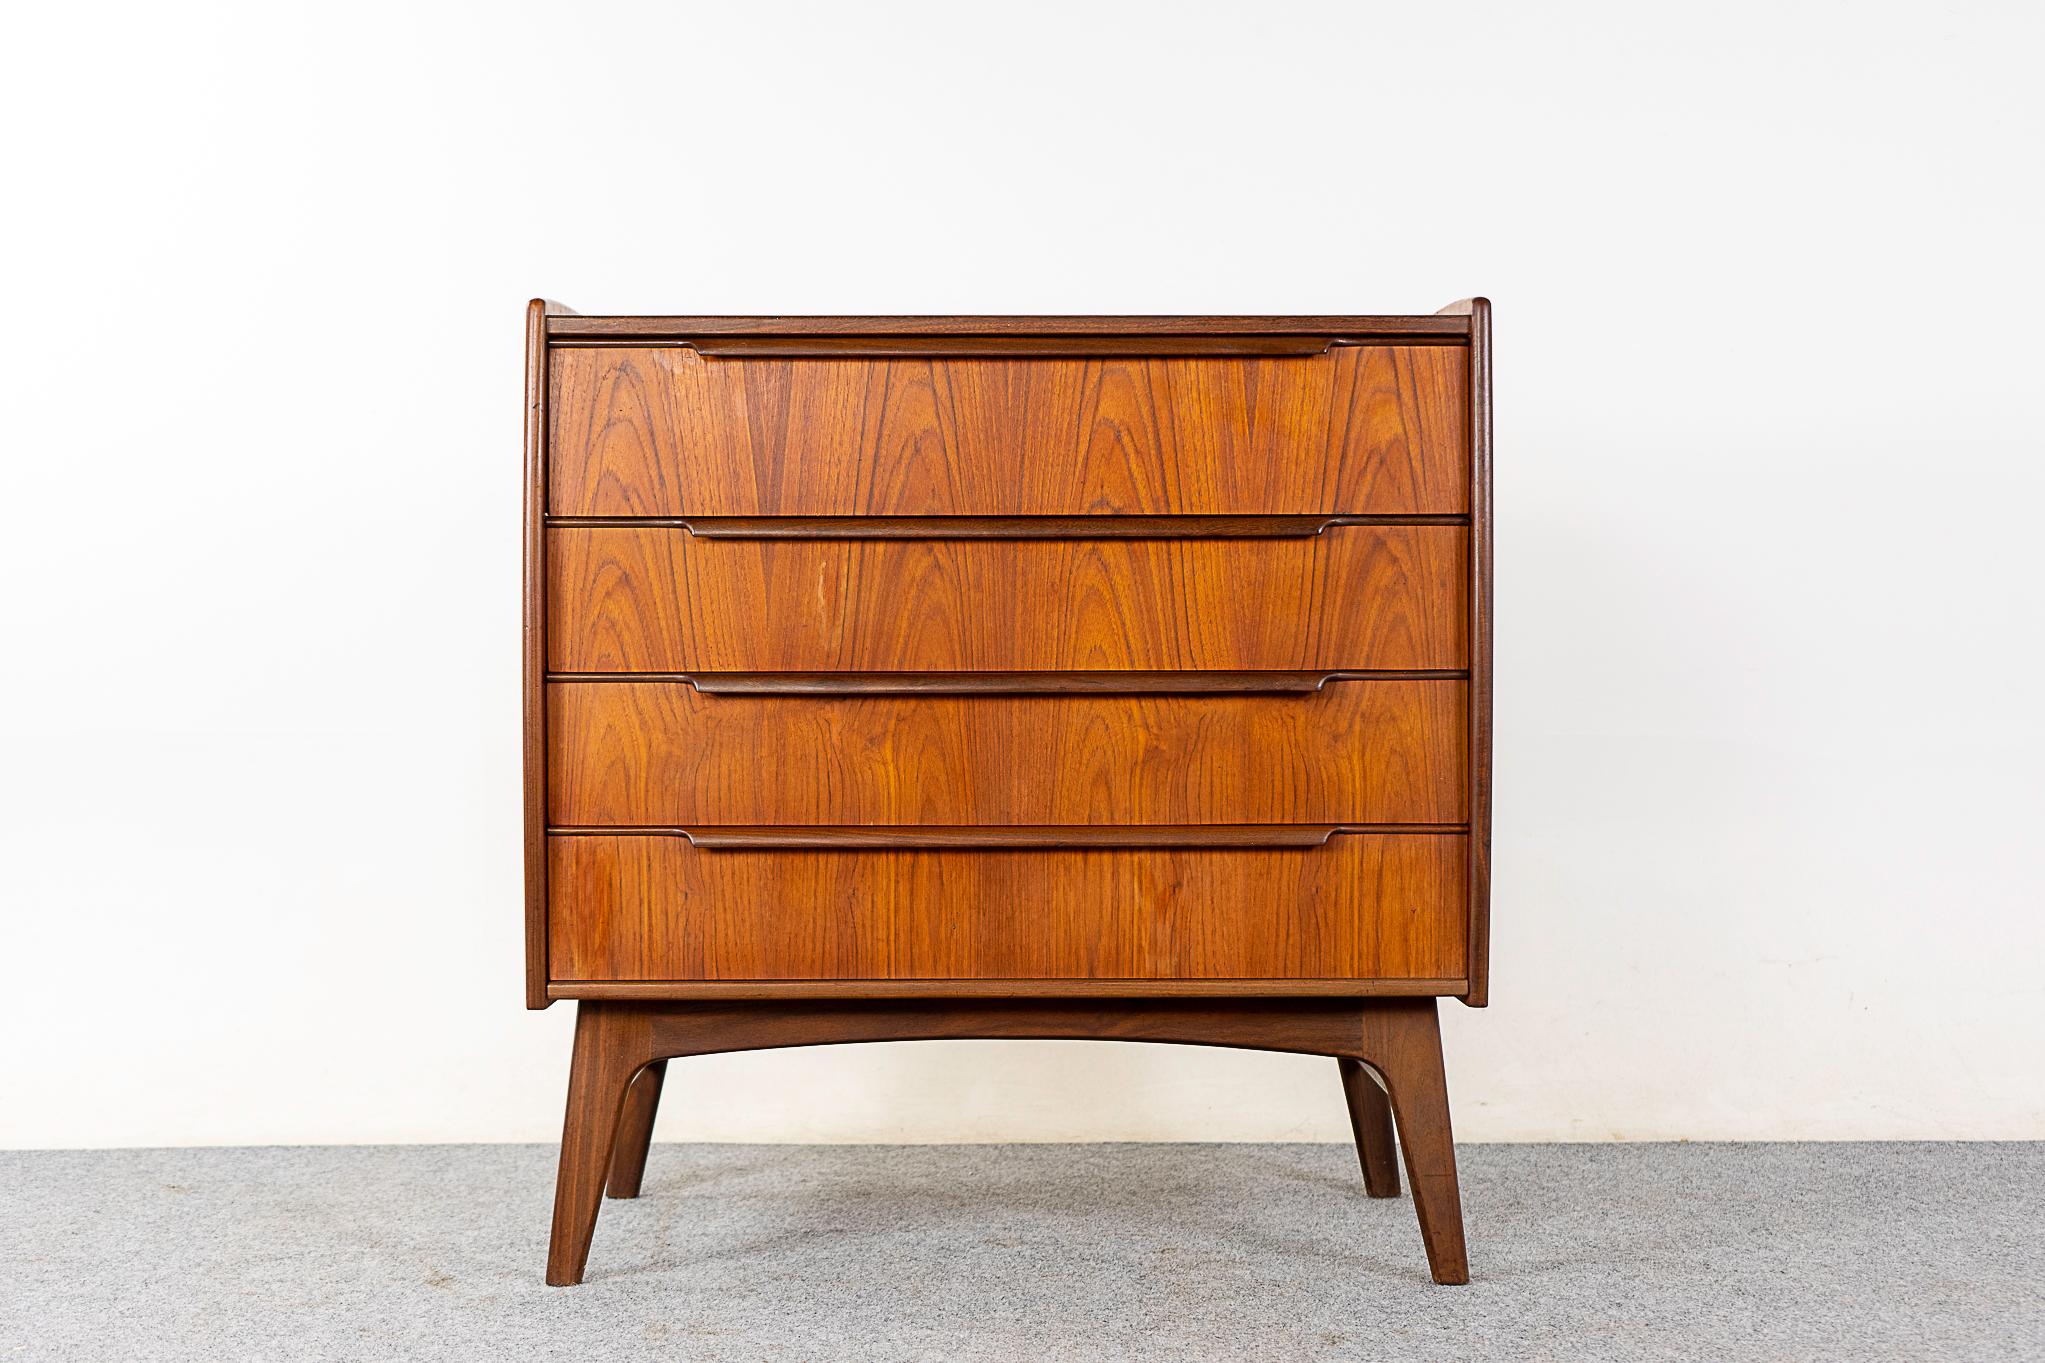 Teak Danish vanity/dresser, circa 1960's. Slide out table platform opens to an amoeboid shaped mirror, black glass surface and sleek storage. Solid wood trim, stunning book-matched veneer drawer faces with dovetail construction. Solid wood base with